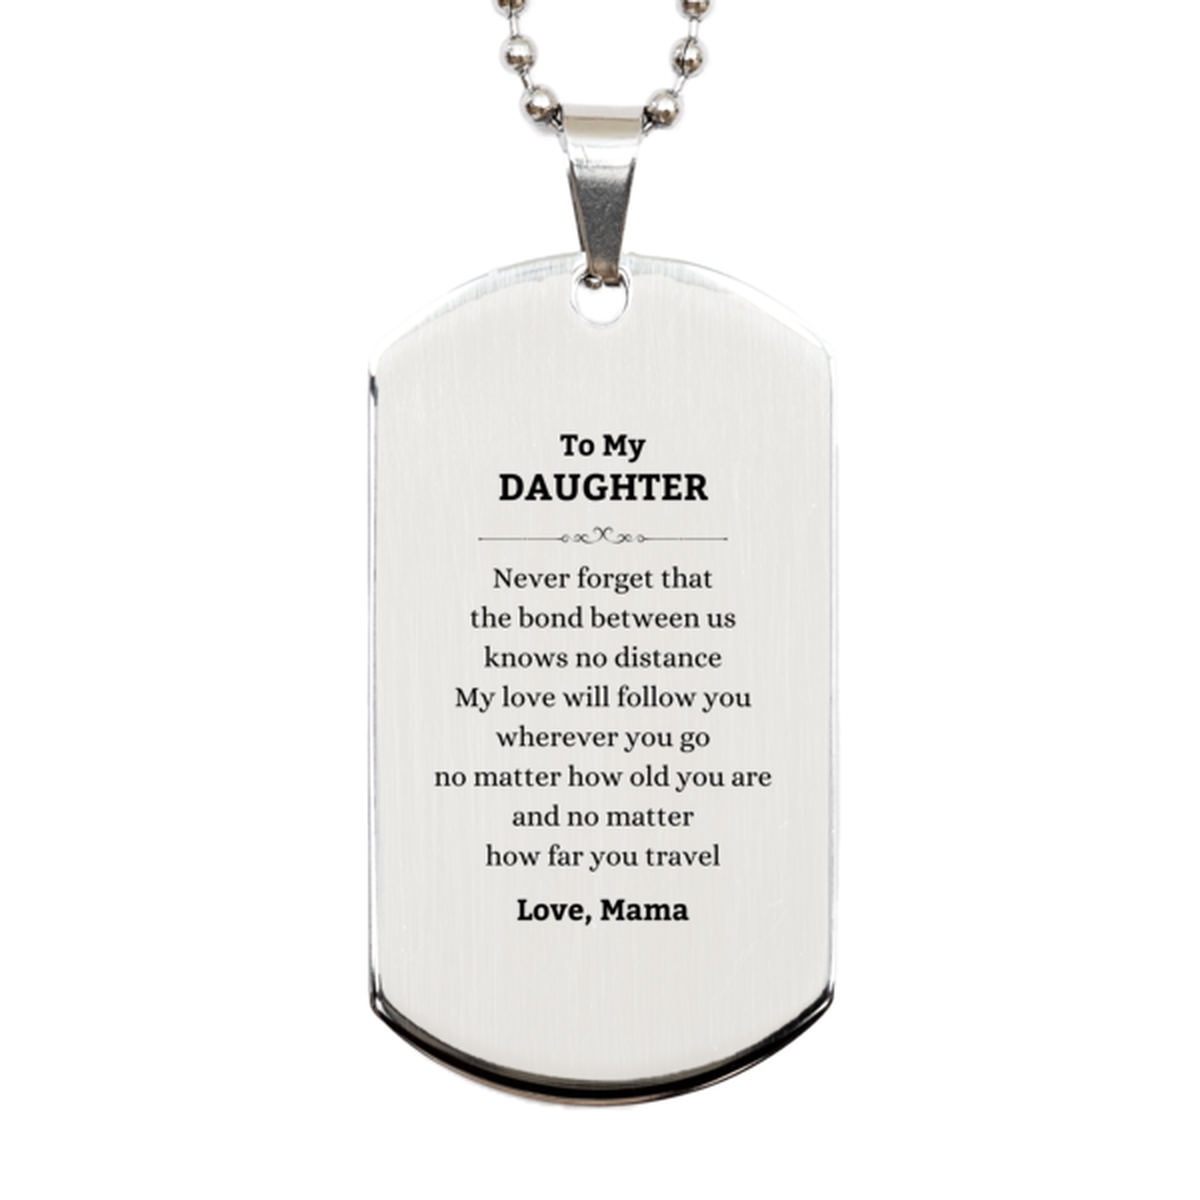 Daughter Birthday Gifts from Mama, Adjustable Silver Dog Tag for Daughter Christmas Graduation Unique Gifts Daughter Never forget that the bond between us knows no distance. Love, Mama